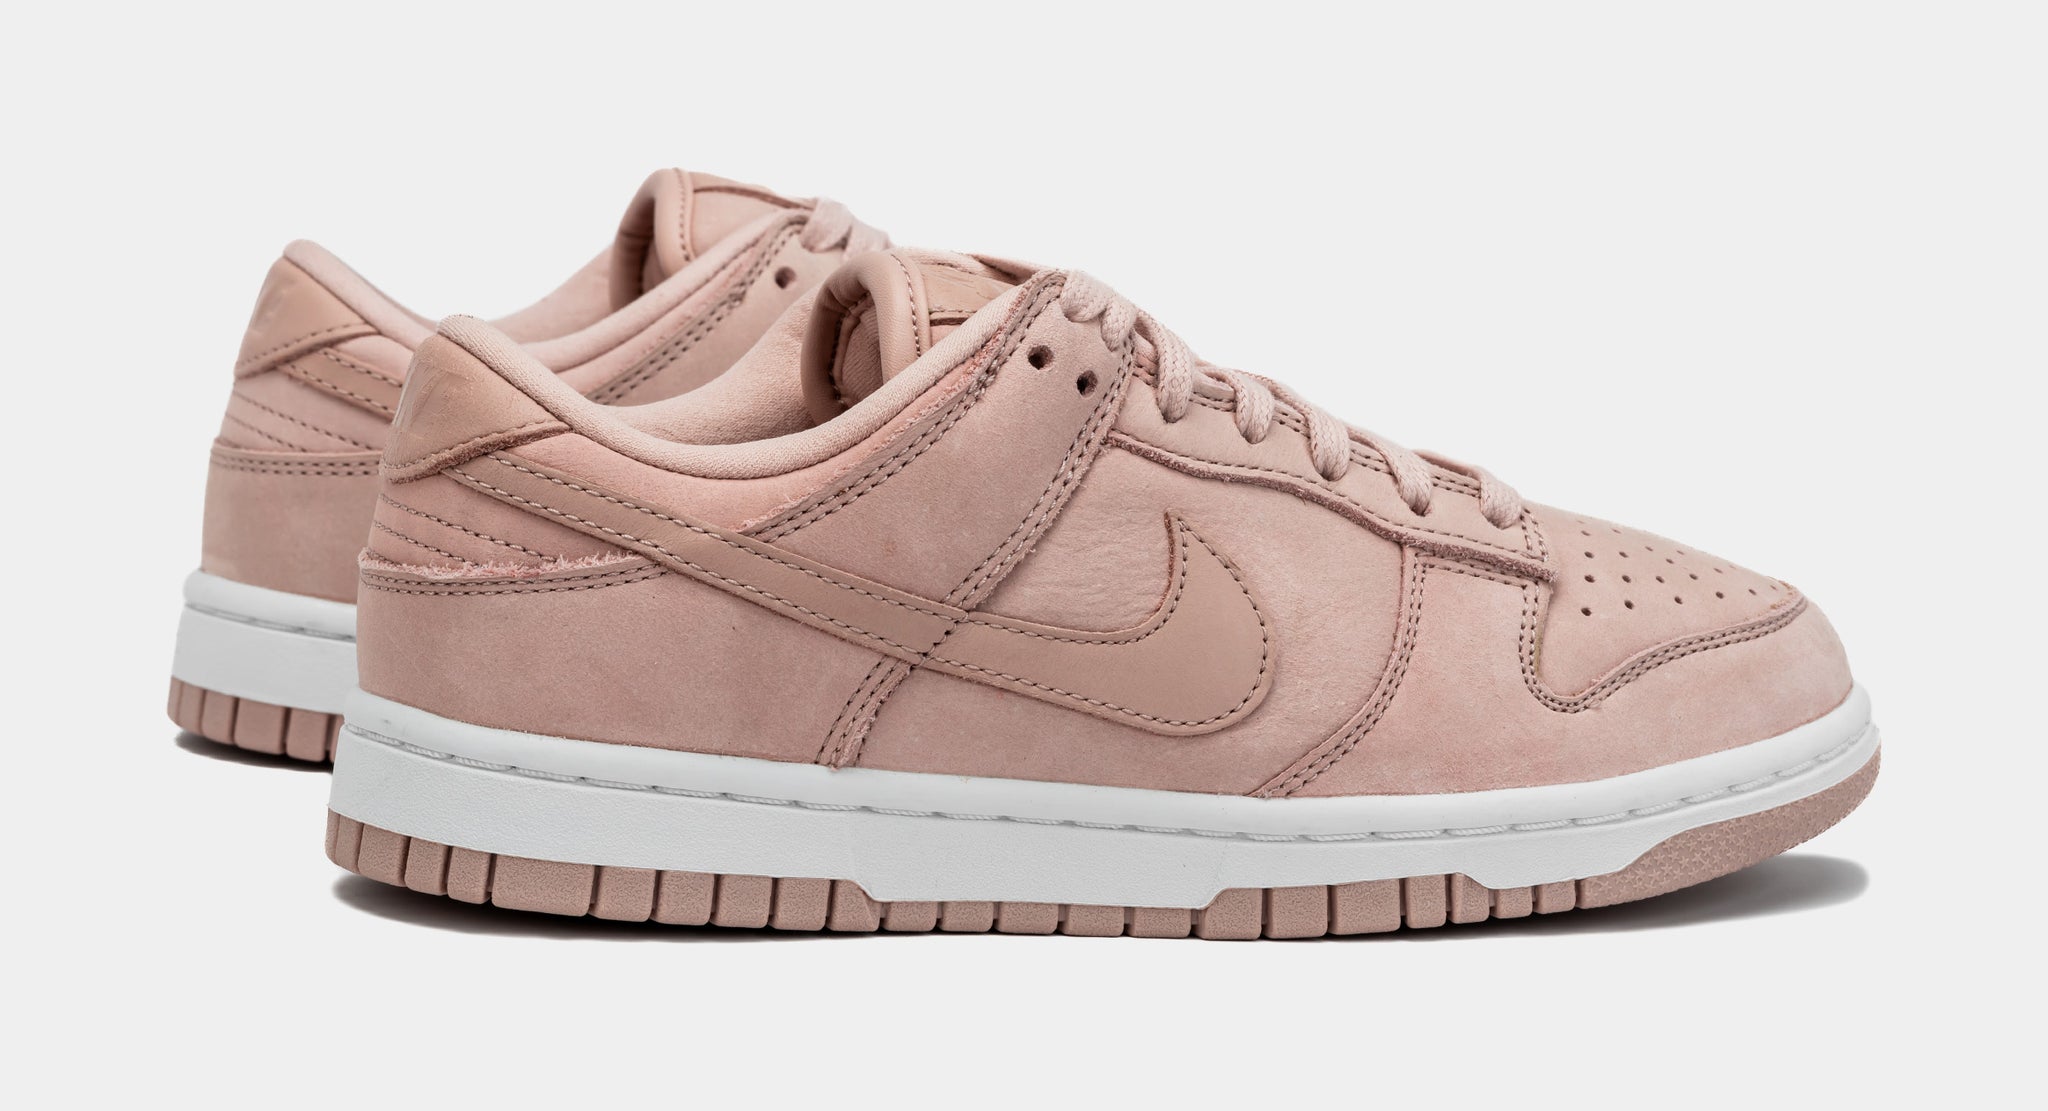 Nike Dunk Low Pink Oxford Womens Lifestyle Shoes Pink DV7415